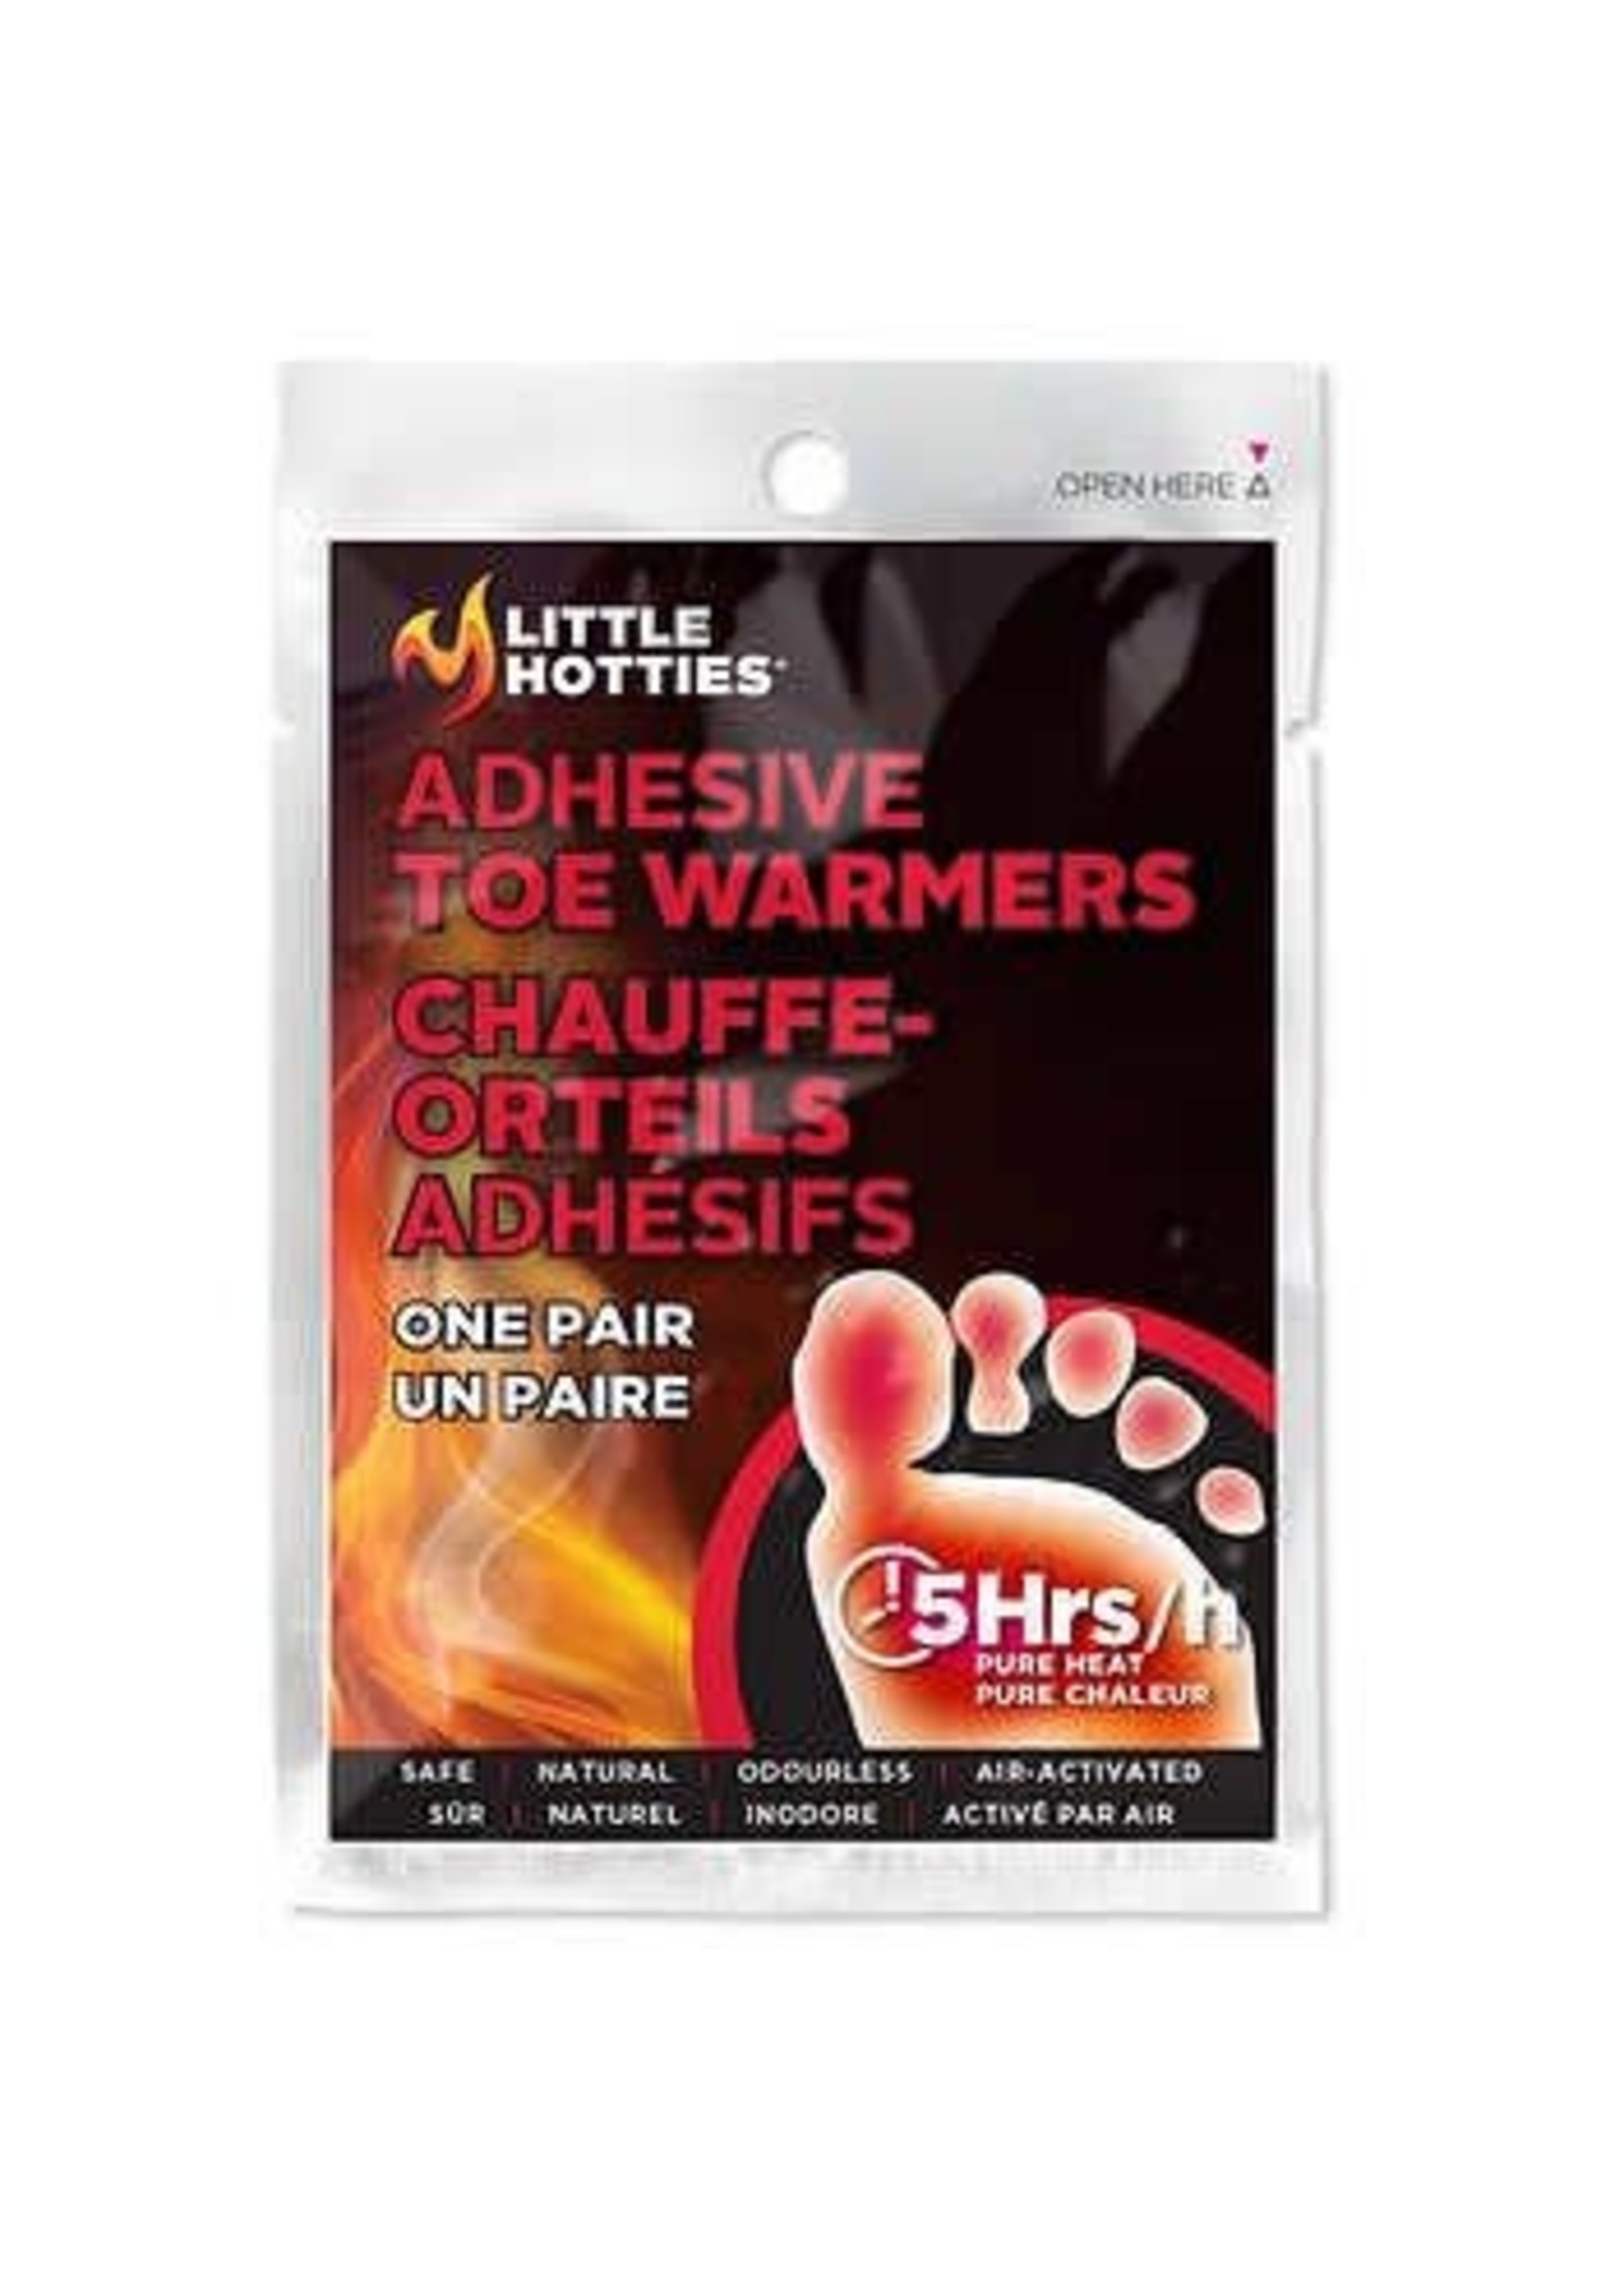 LITTLE HOTTIES ADHESIVE TOE WARMERS ONE PAIR  5HRS